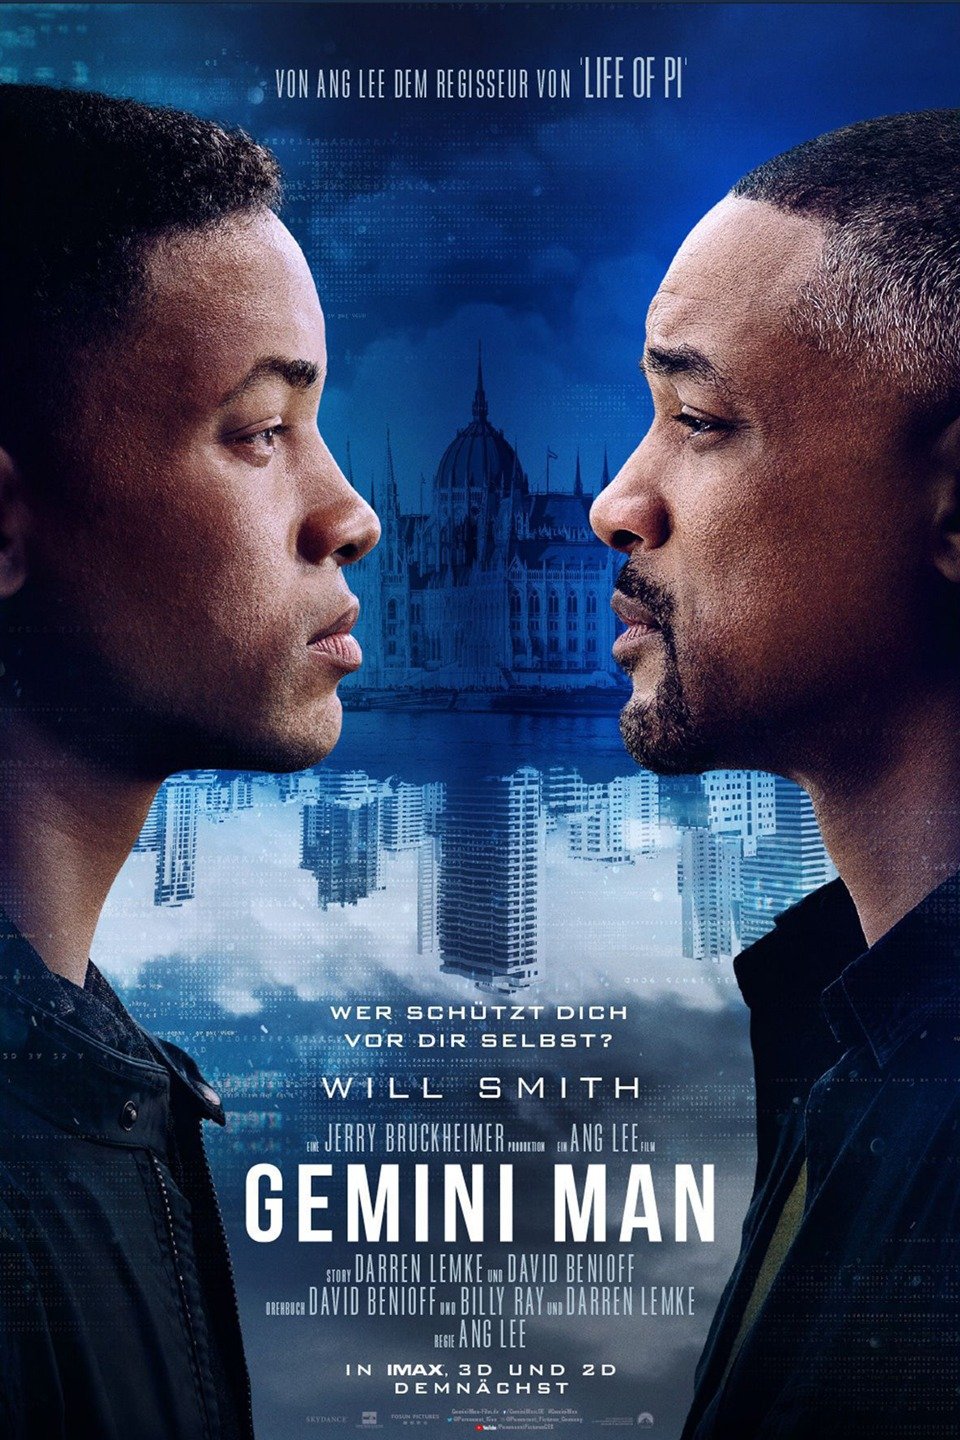 Gemini Man Trailer 2 Trailers And Videos Rotten Tomatoes